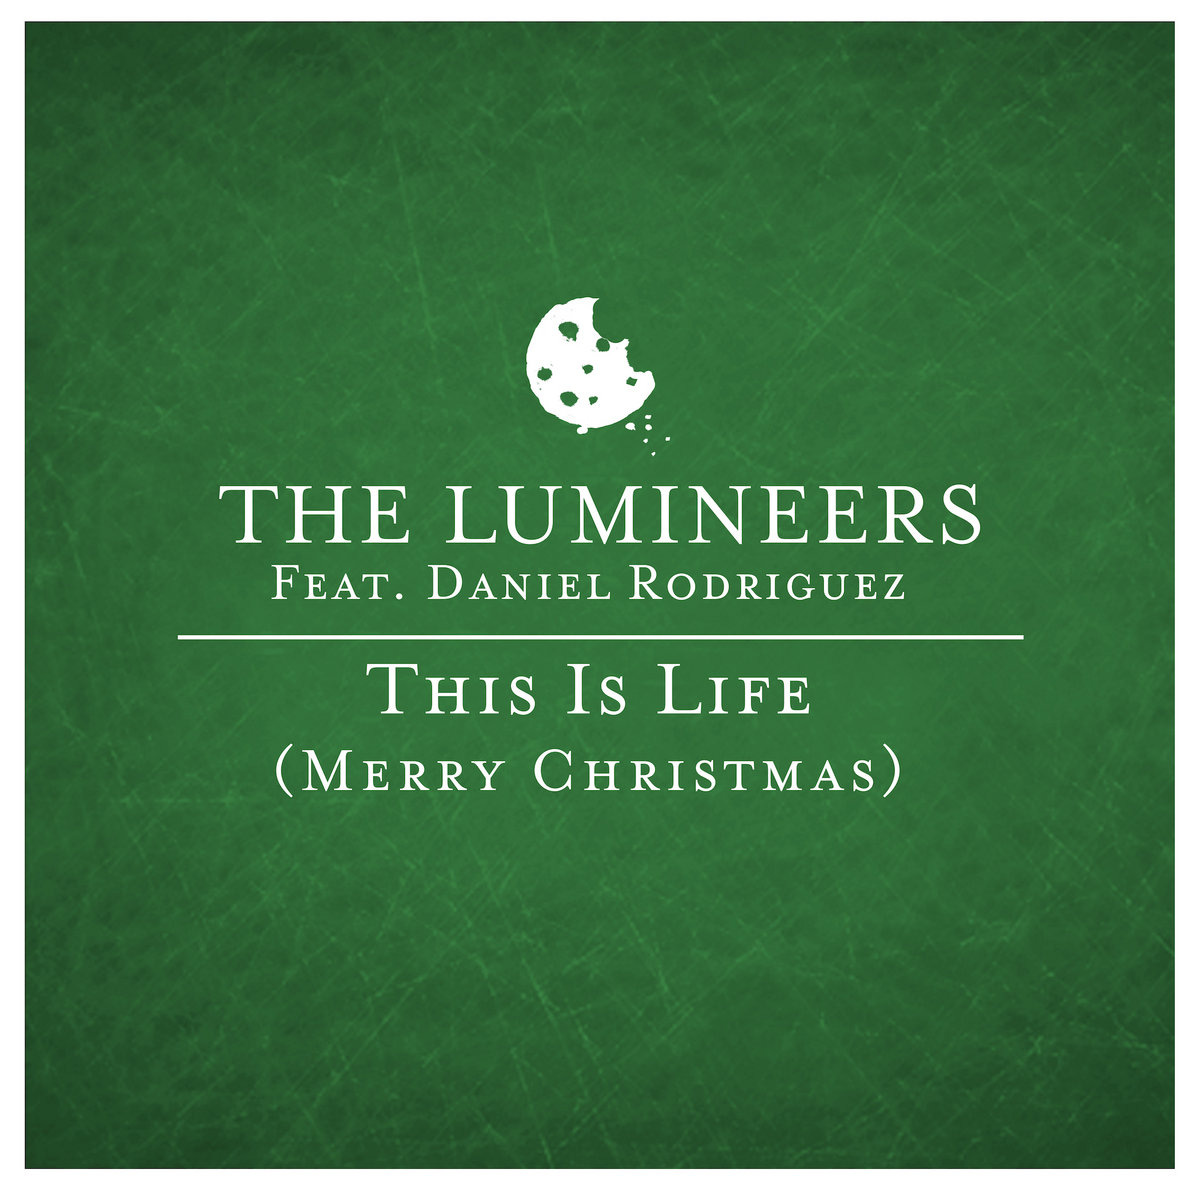 This is Life (Merry Christmas) feat. Daniel Rodriguez | The Lumineers